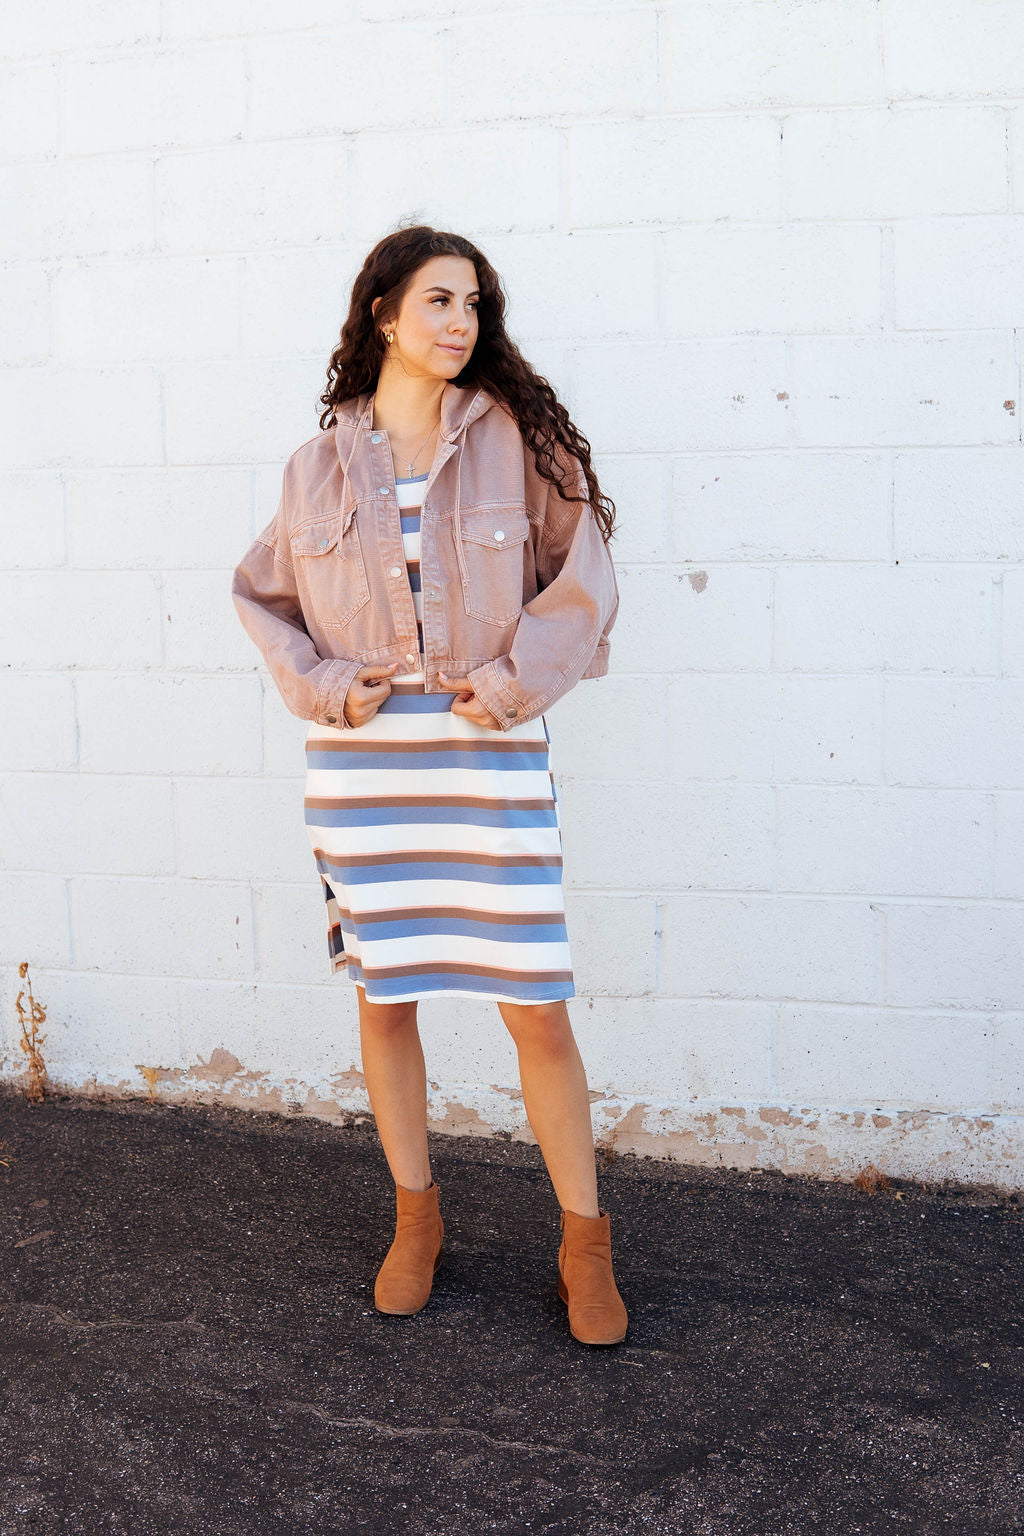 Oversized boyfriend jacket perfect for fall in a dusty pink color